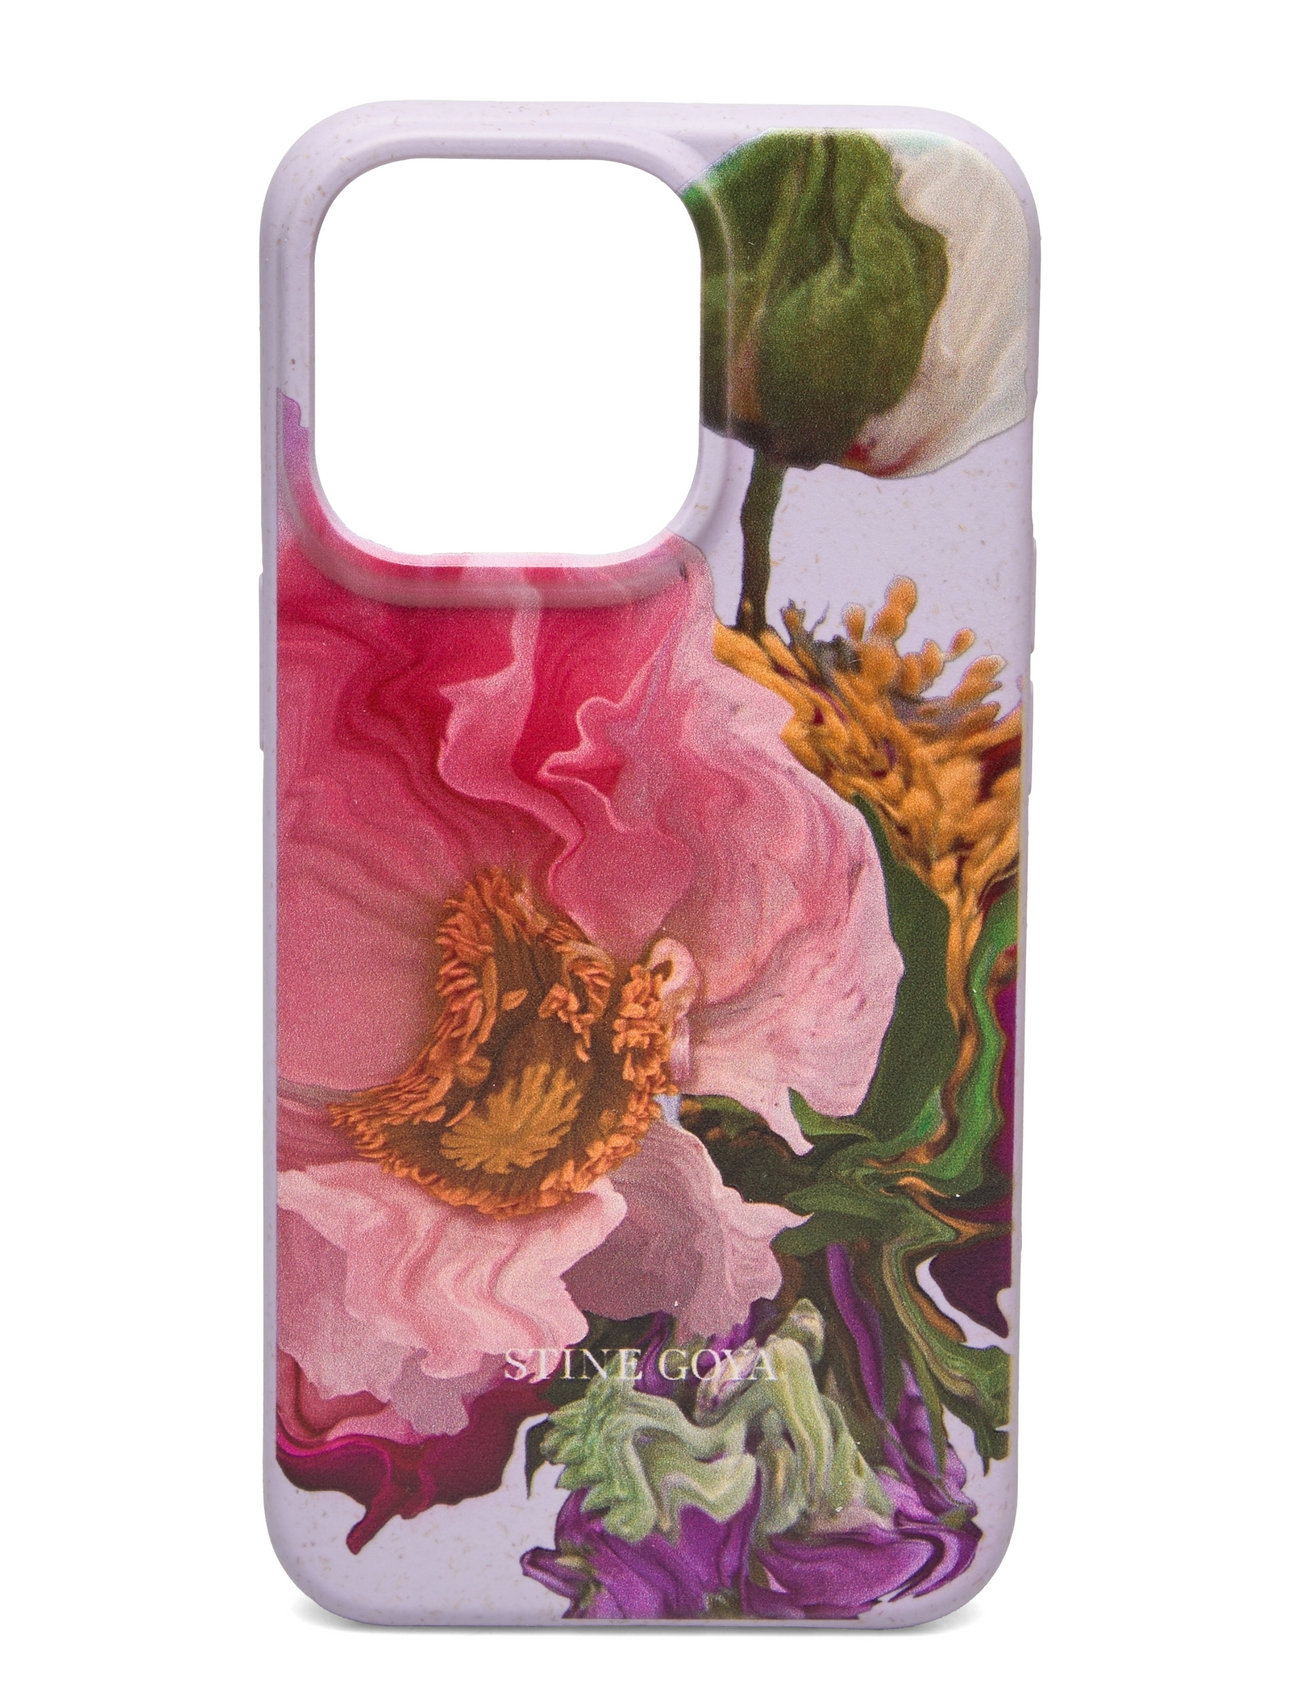 STINE GOYA 1727 Iphone Pro Cover - Mobil cover - Boozt.com